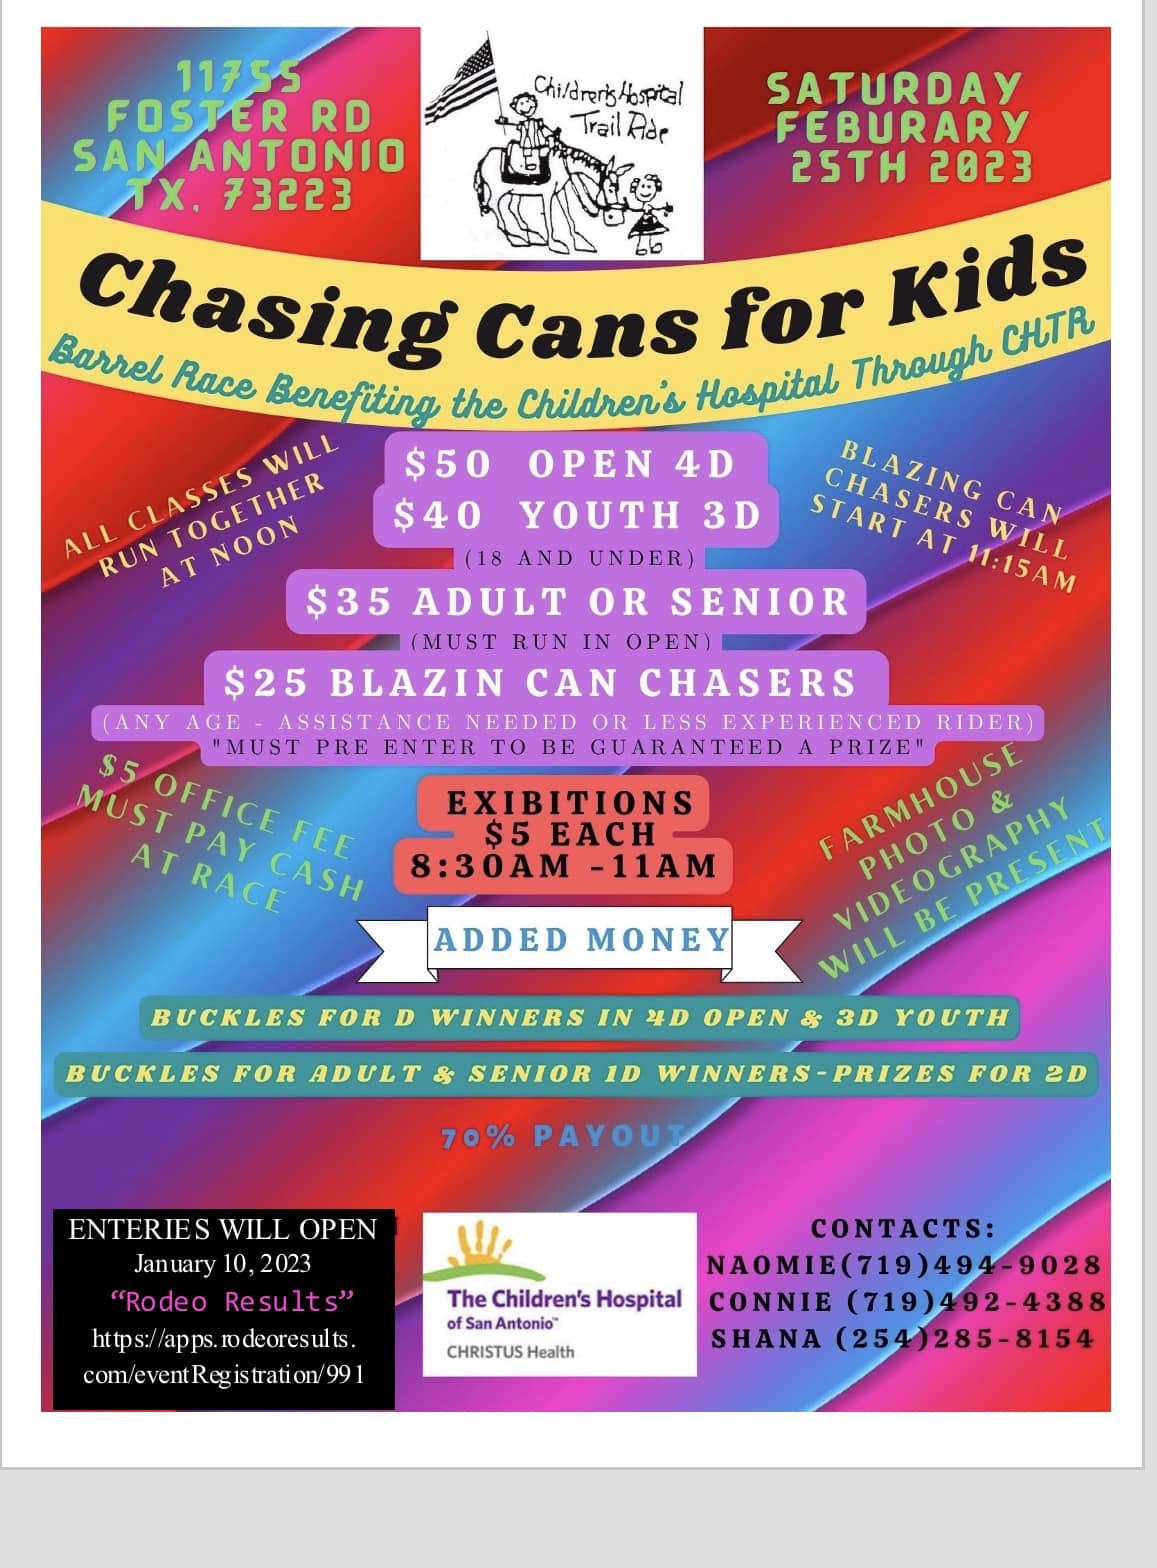 Chasing Cans for Kids